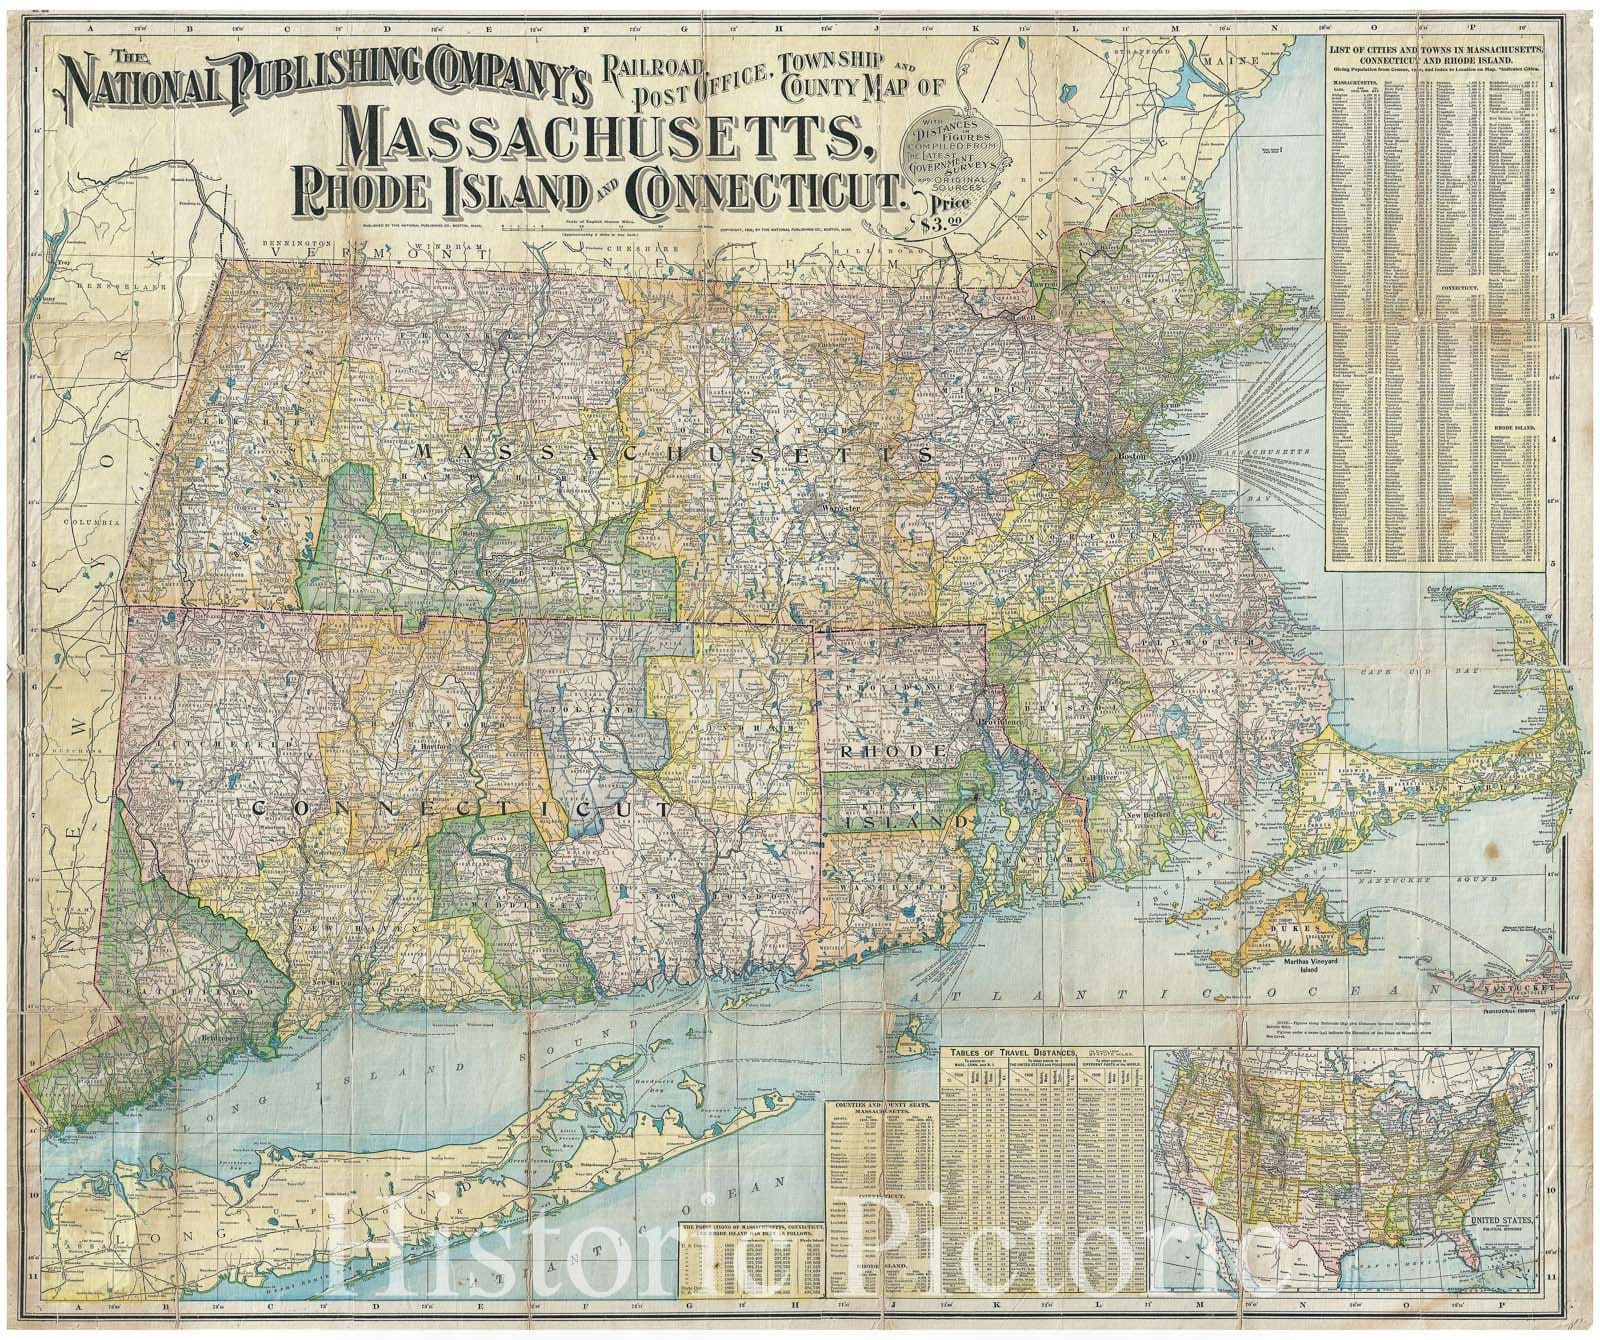 Historic Map : National Publishing Company Railroad Antique Map of Massachusetts, Rhode Island and Connecticut, 1902, Vintage Wall Art